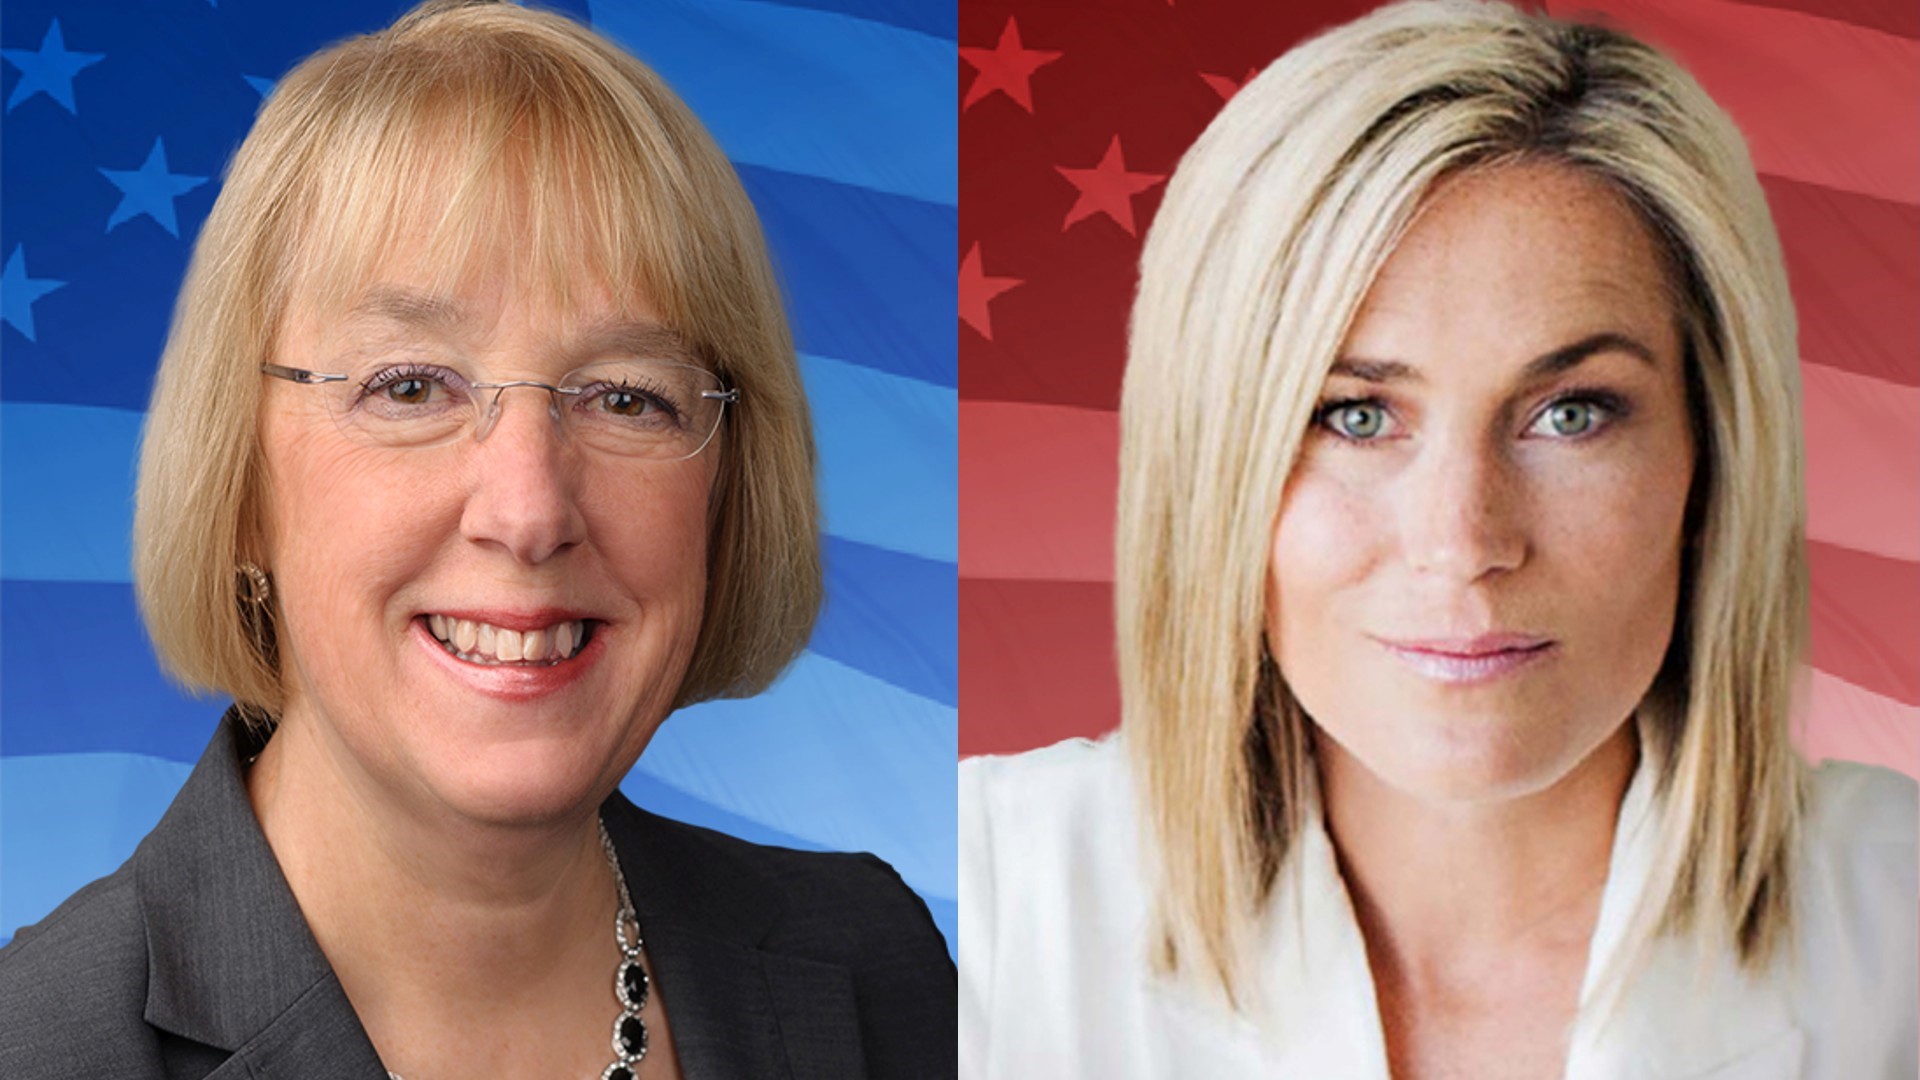 Sen. Patty Murray and challenger Tiffany Smiley debate ahead of the November election.